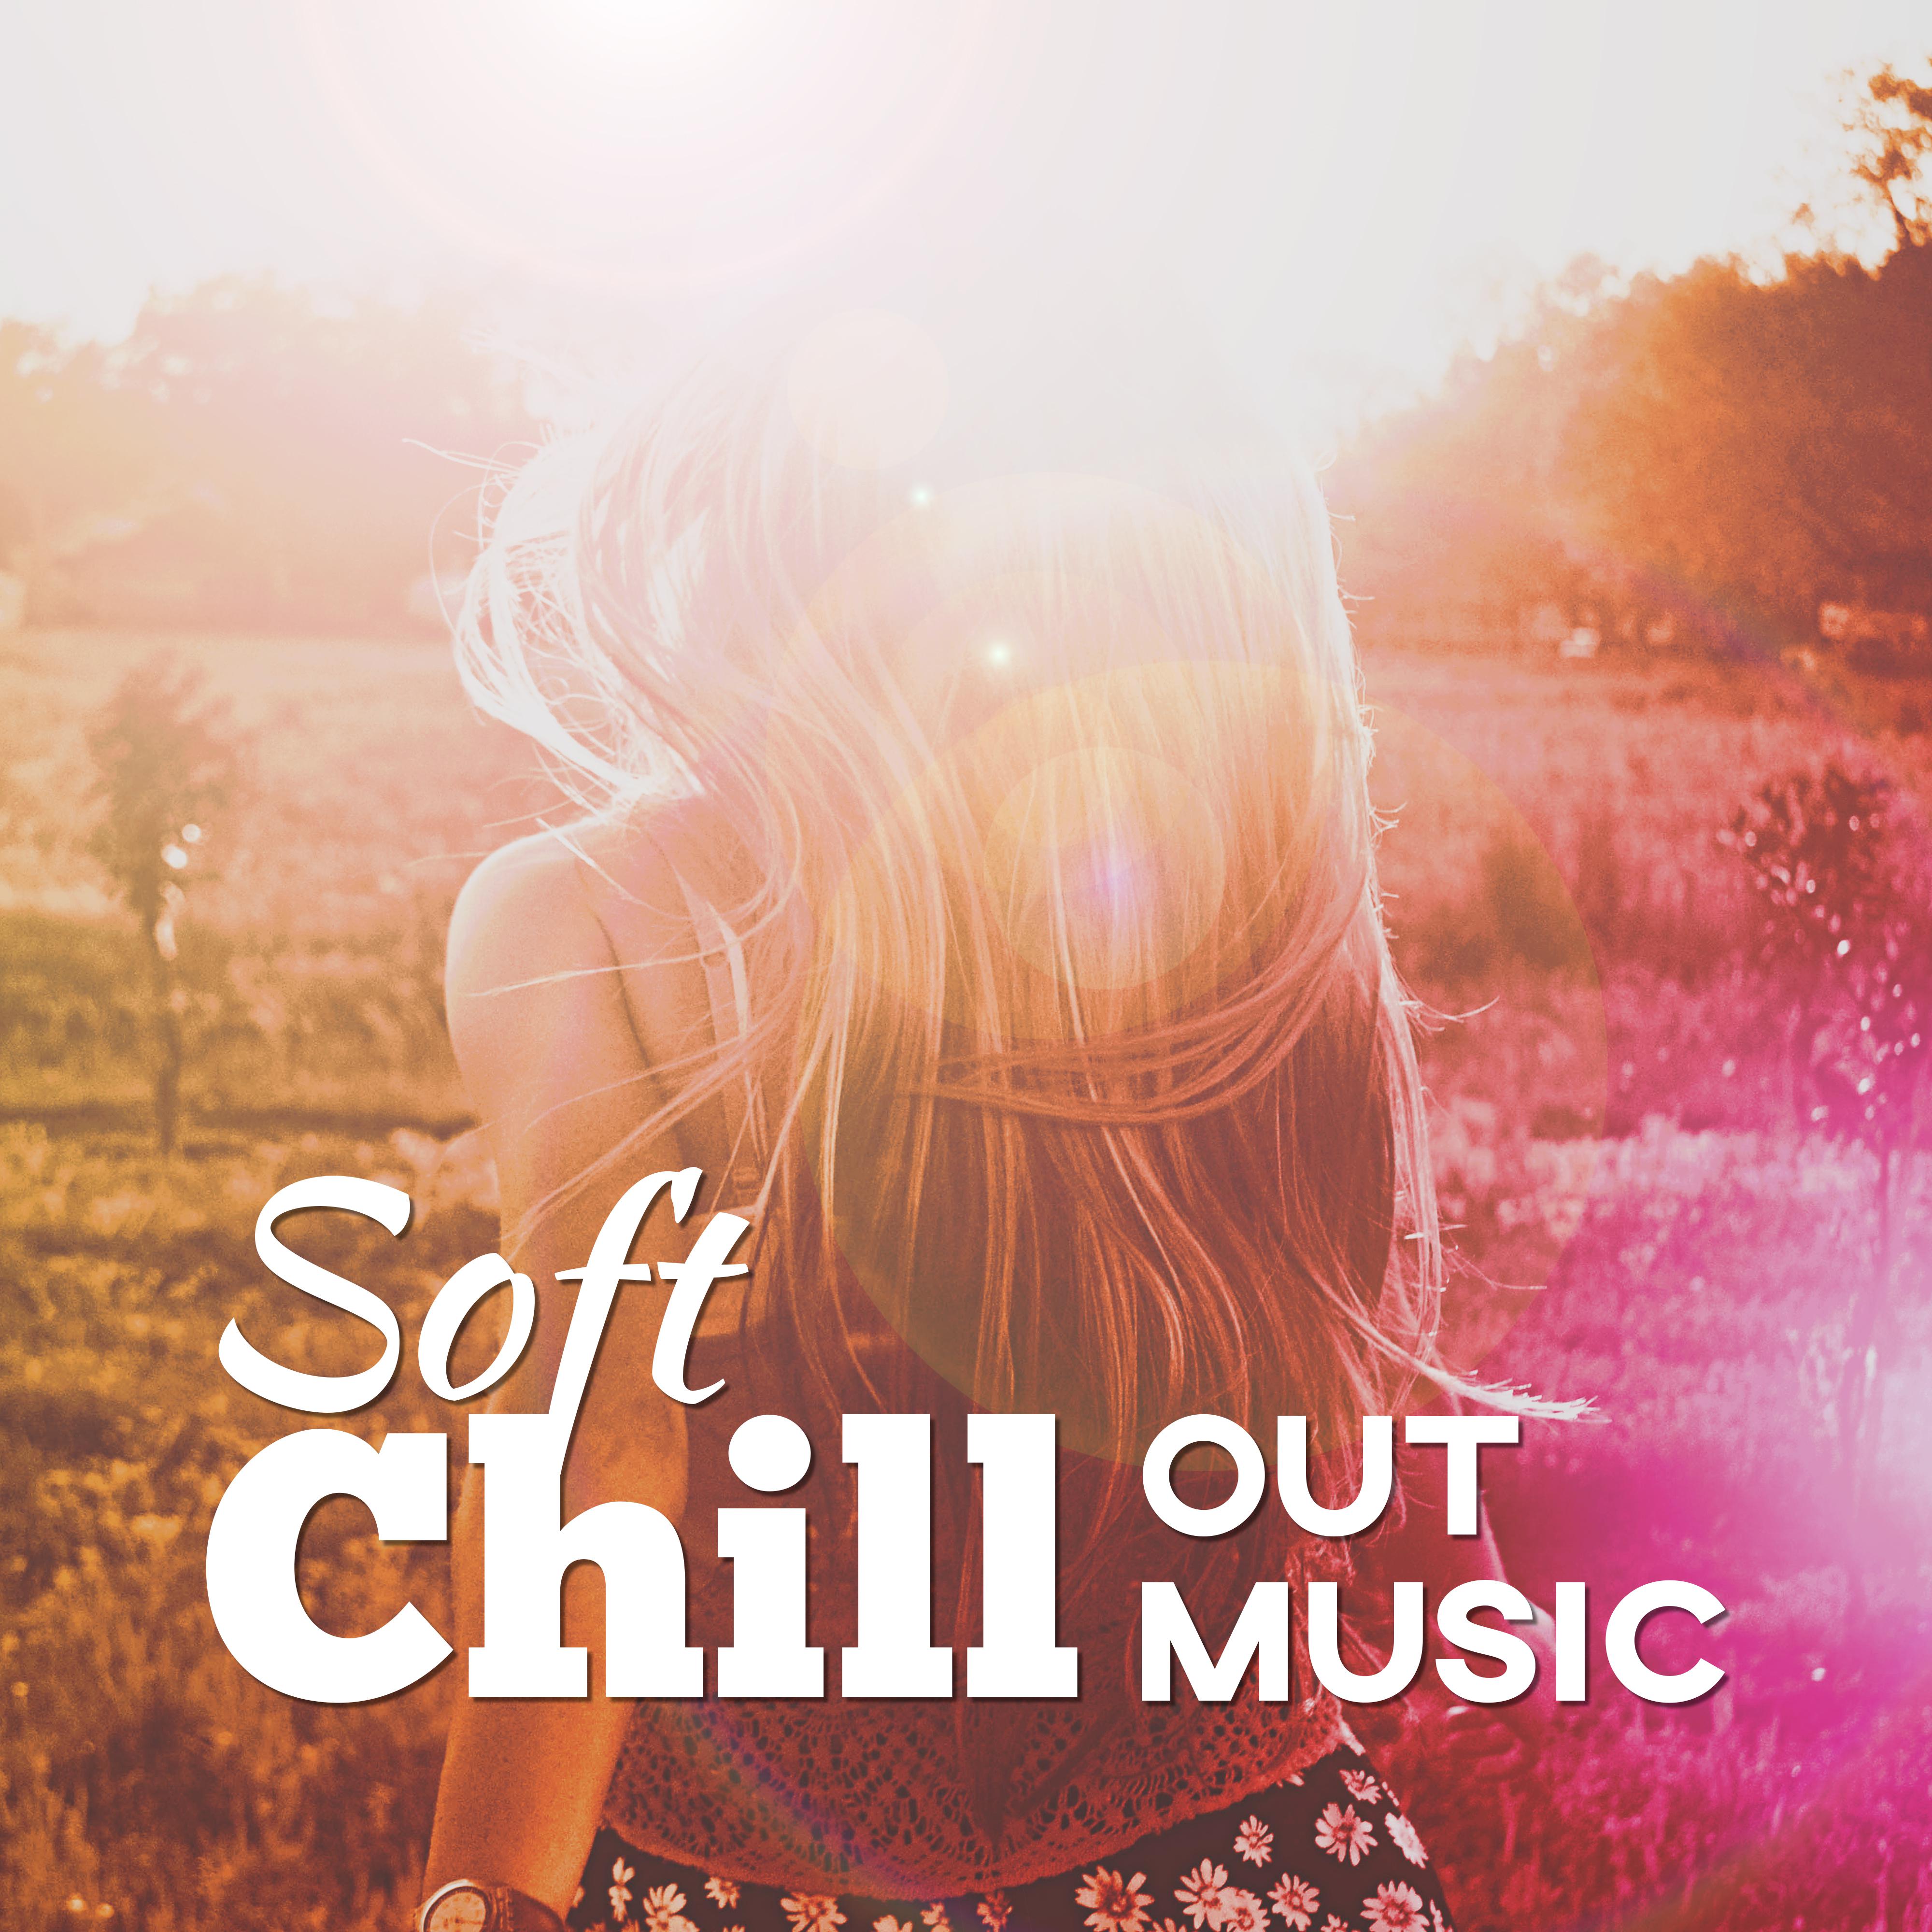 Soft Chill Out Music – Relax for a Moment, Chilled Music, Beach Relaxation